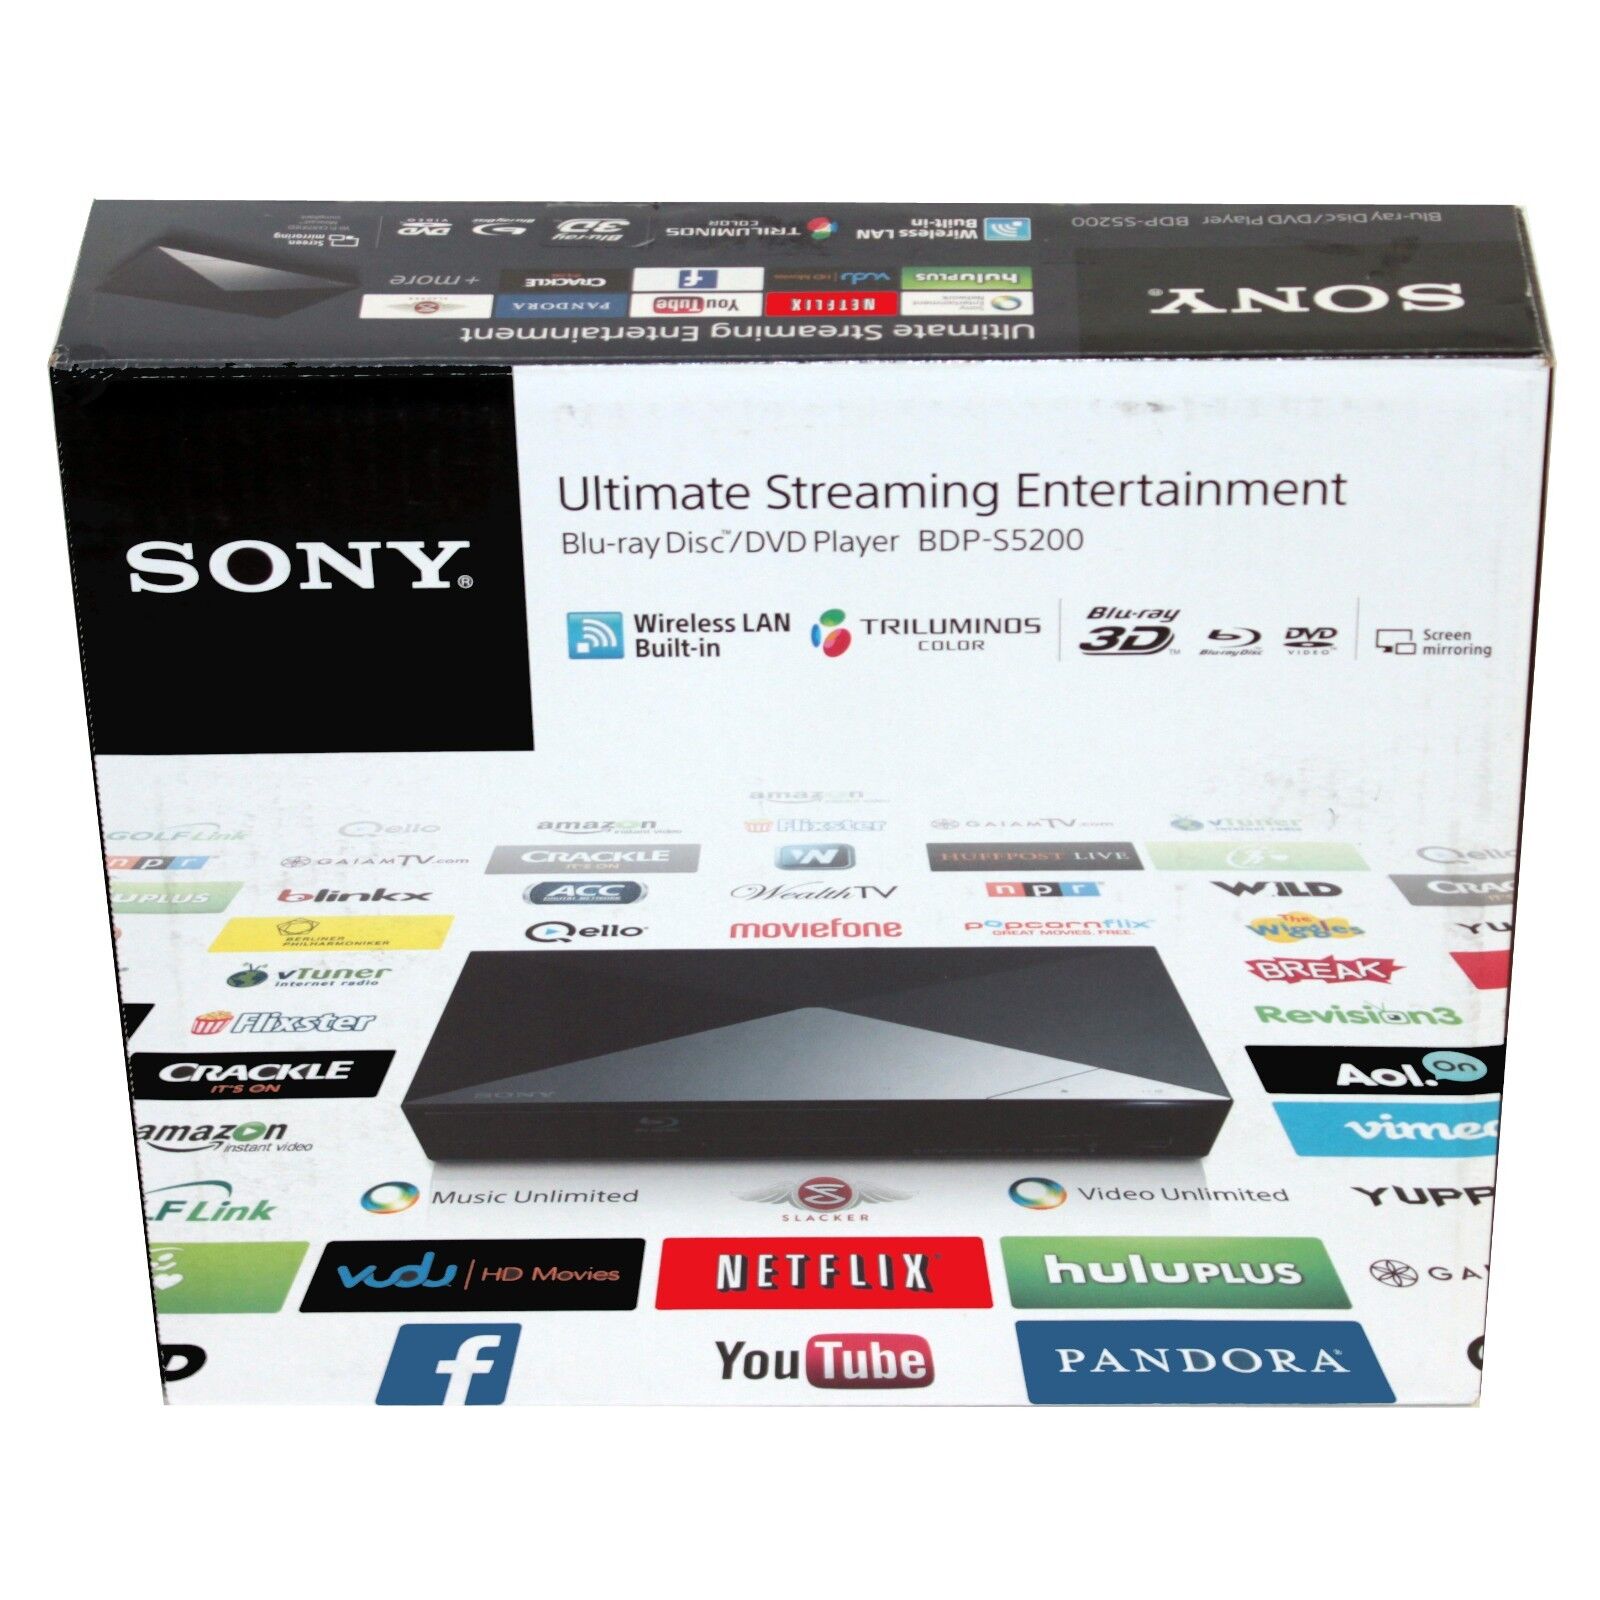 Sony BDP-S5200 3D Blu-ray/DVD Player with Built-in Wi-Fi VG In Box BDPS5200